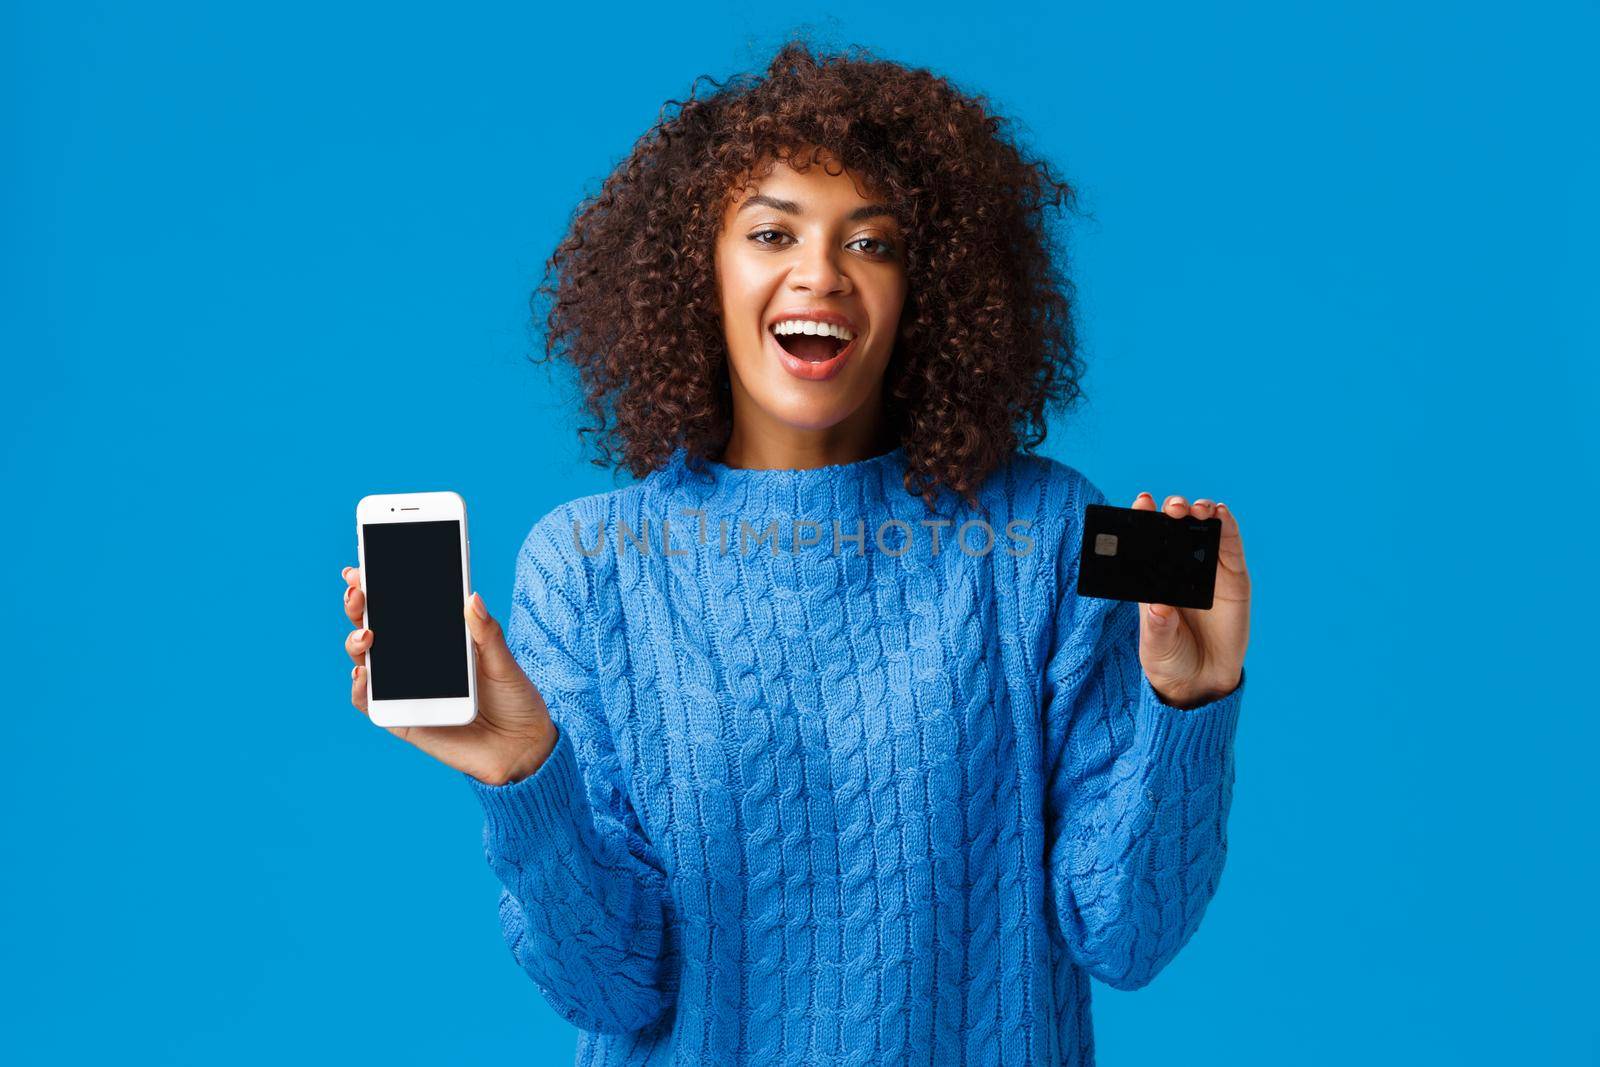 Happy and excited, charming african-american female shopaholic buying presents online, showing application, shopping app and credit card, smiling and laughing, standing blue background.